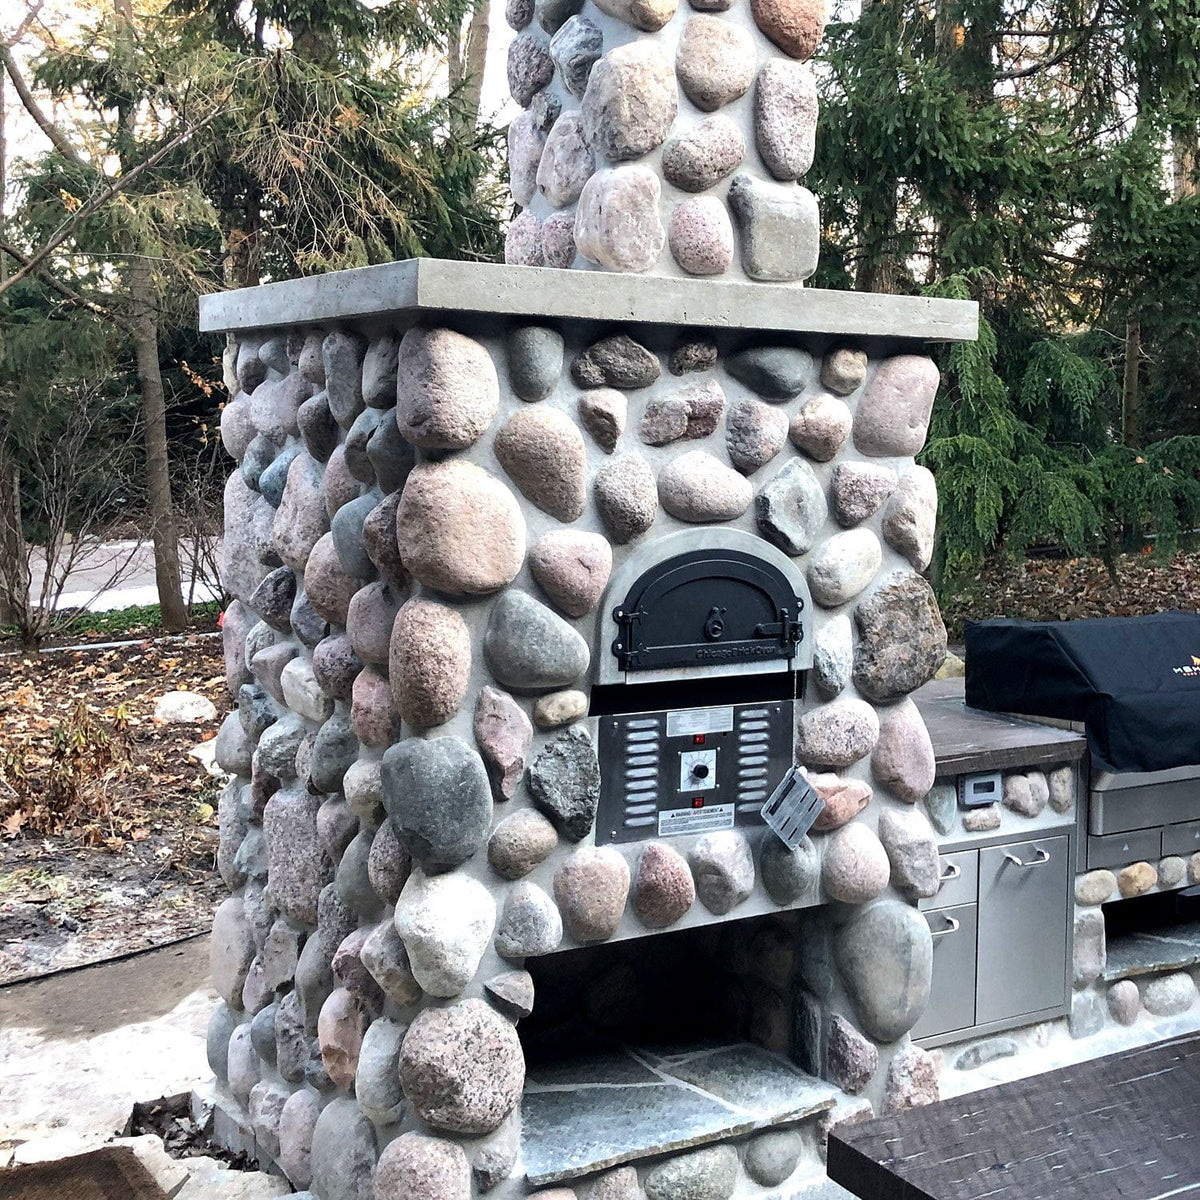 Chicago Brick Oven 35 1/4 Inch Built-In Hybrid Residential Outdoor Pizza Oven DIY Kit